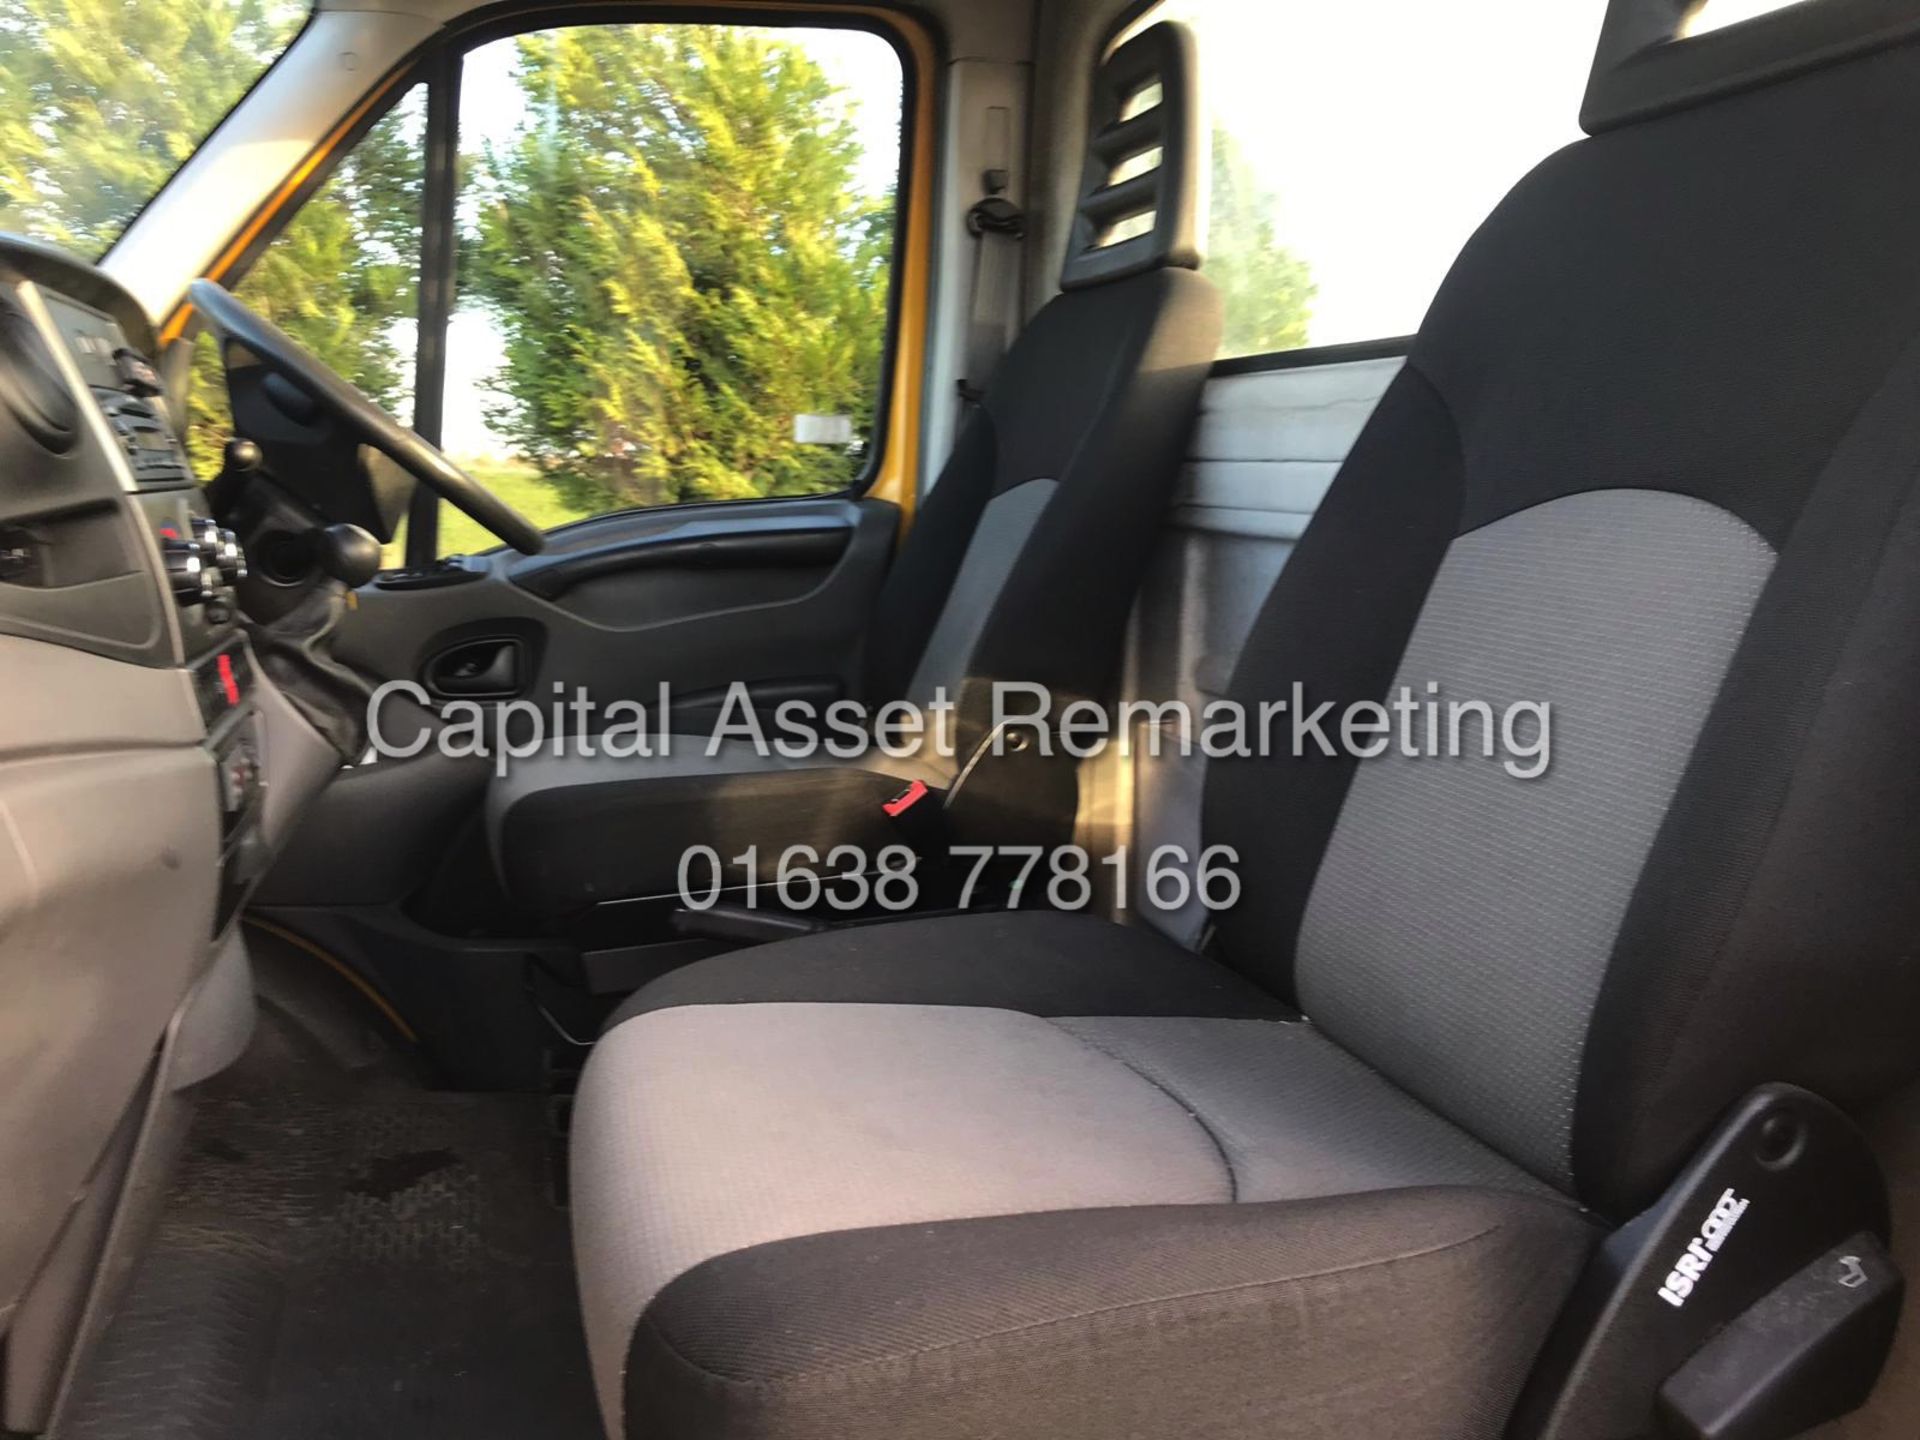 (ON SALE) IVECO DAILY 35S13 - CHASSIS CAB - NEW SHAPE - 2013 MODEL - LONG MOT - IDEAL RECOVERY TRUCK - Image 7 of 11